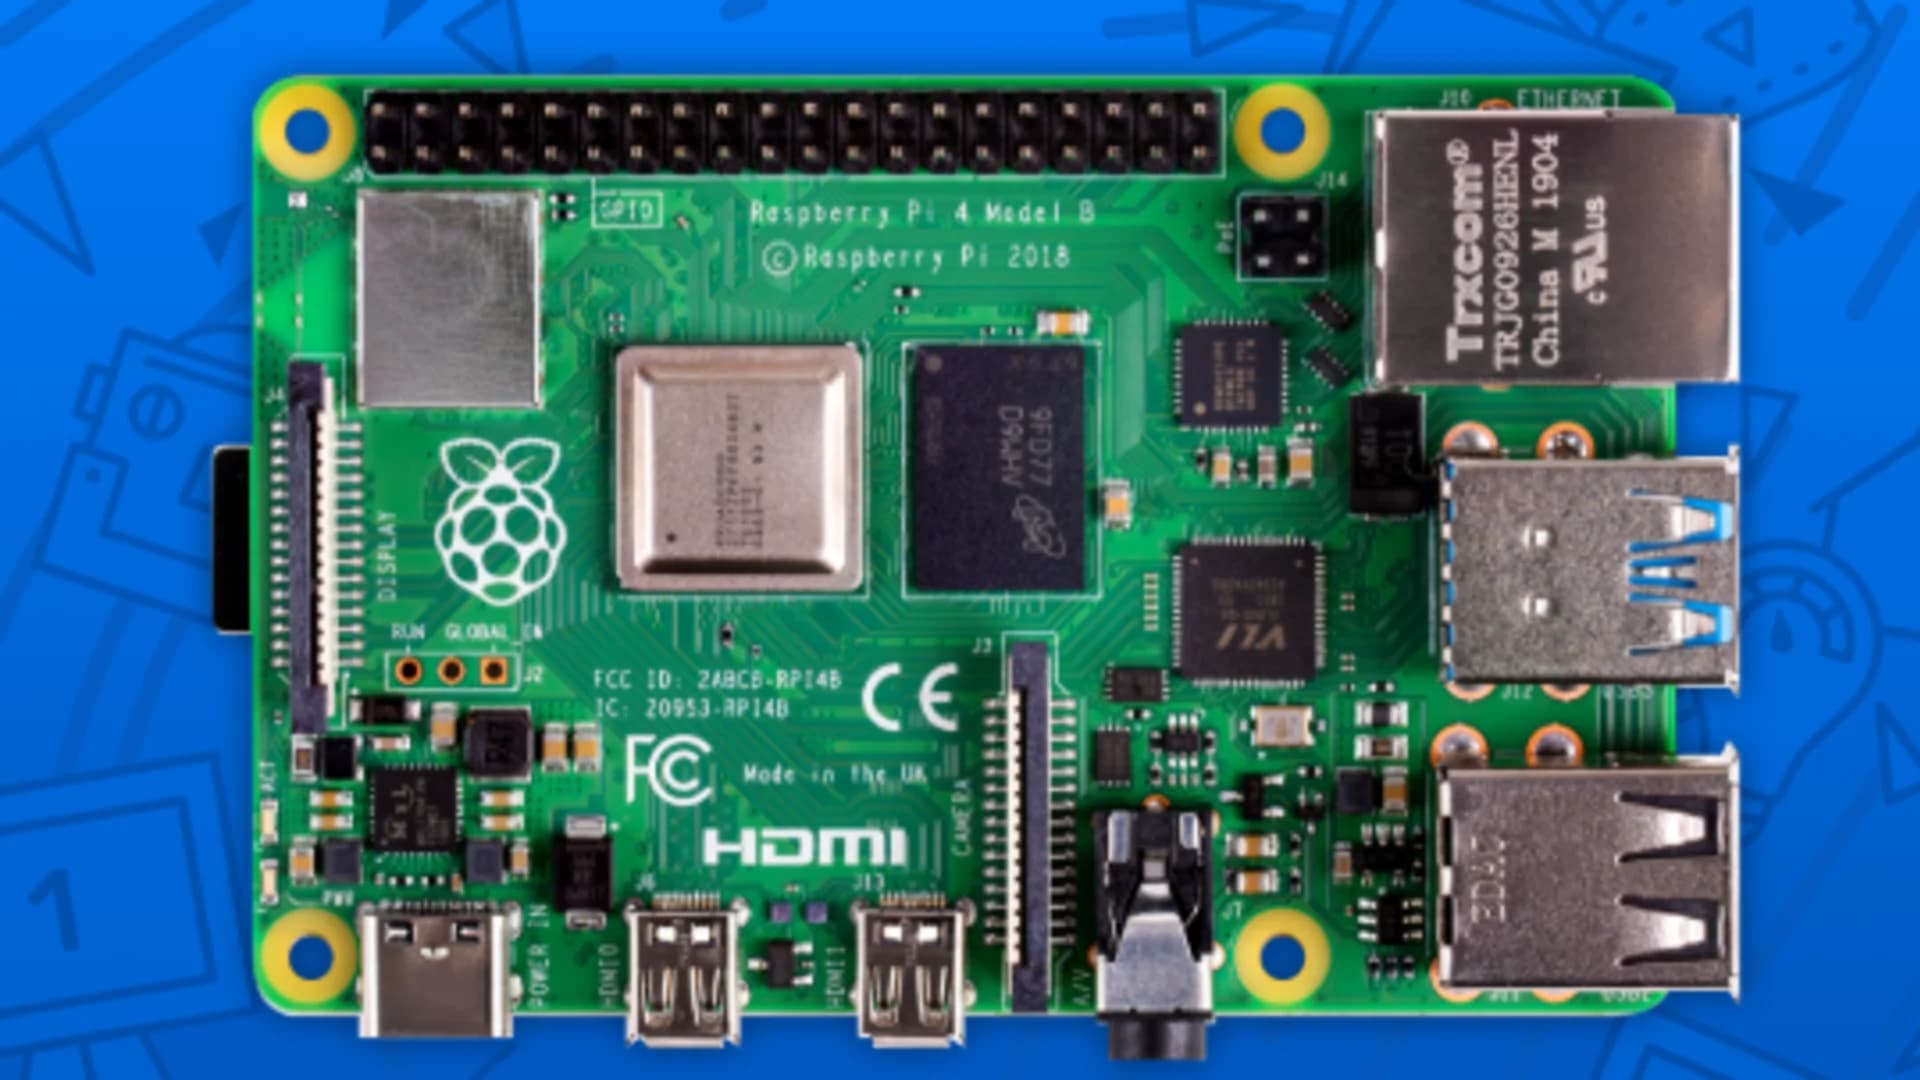 Raspberry Pi 4 on sale now, supports dual 4K displays